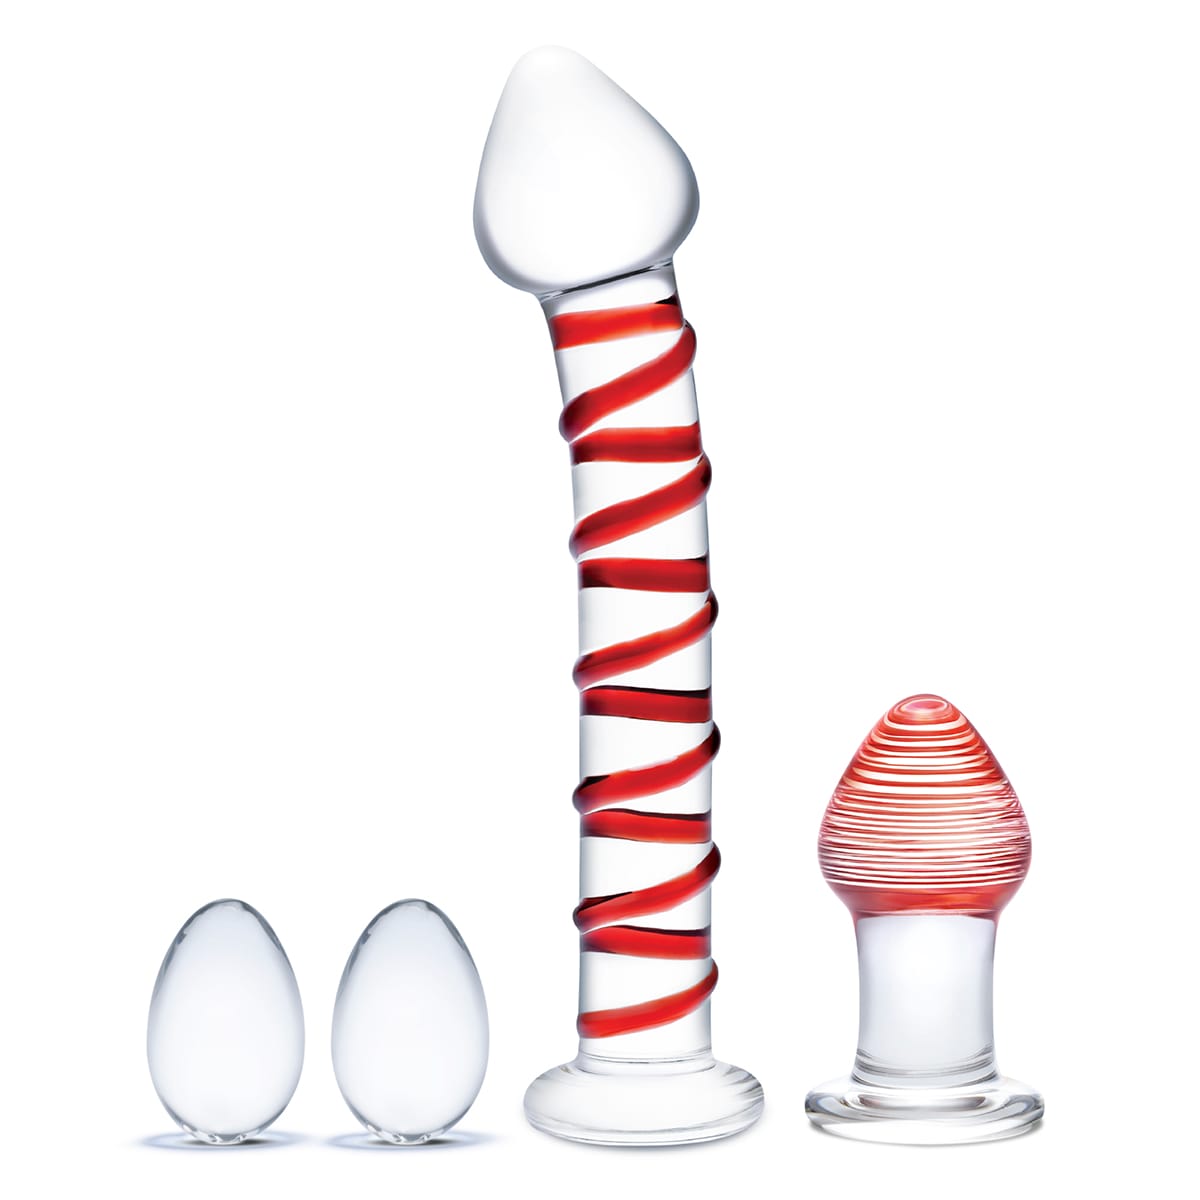 Buy GLAS Mr. Swirly 4pc Set Eggs: 1.75 / Dil: 8.00 / Plug: 3.25 long and Eggs: 1.19 / Dil: 1.67 / Plug: 1.59 thick dildo made by Glas.